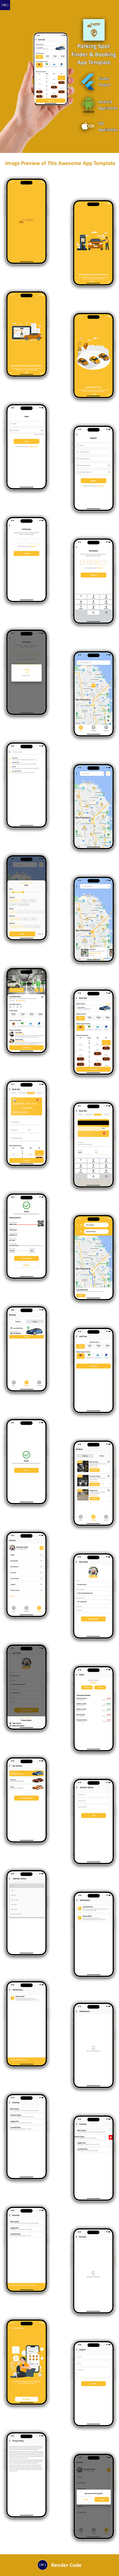 Parking Spot Finder & Booking Android App Template + iOS App Template | Flutter | ParkingSpot - 11